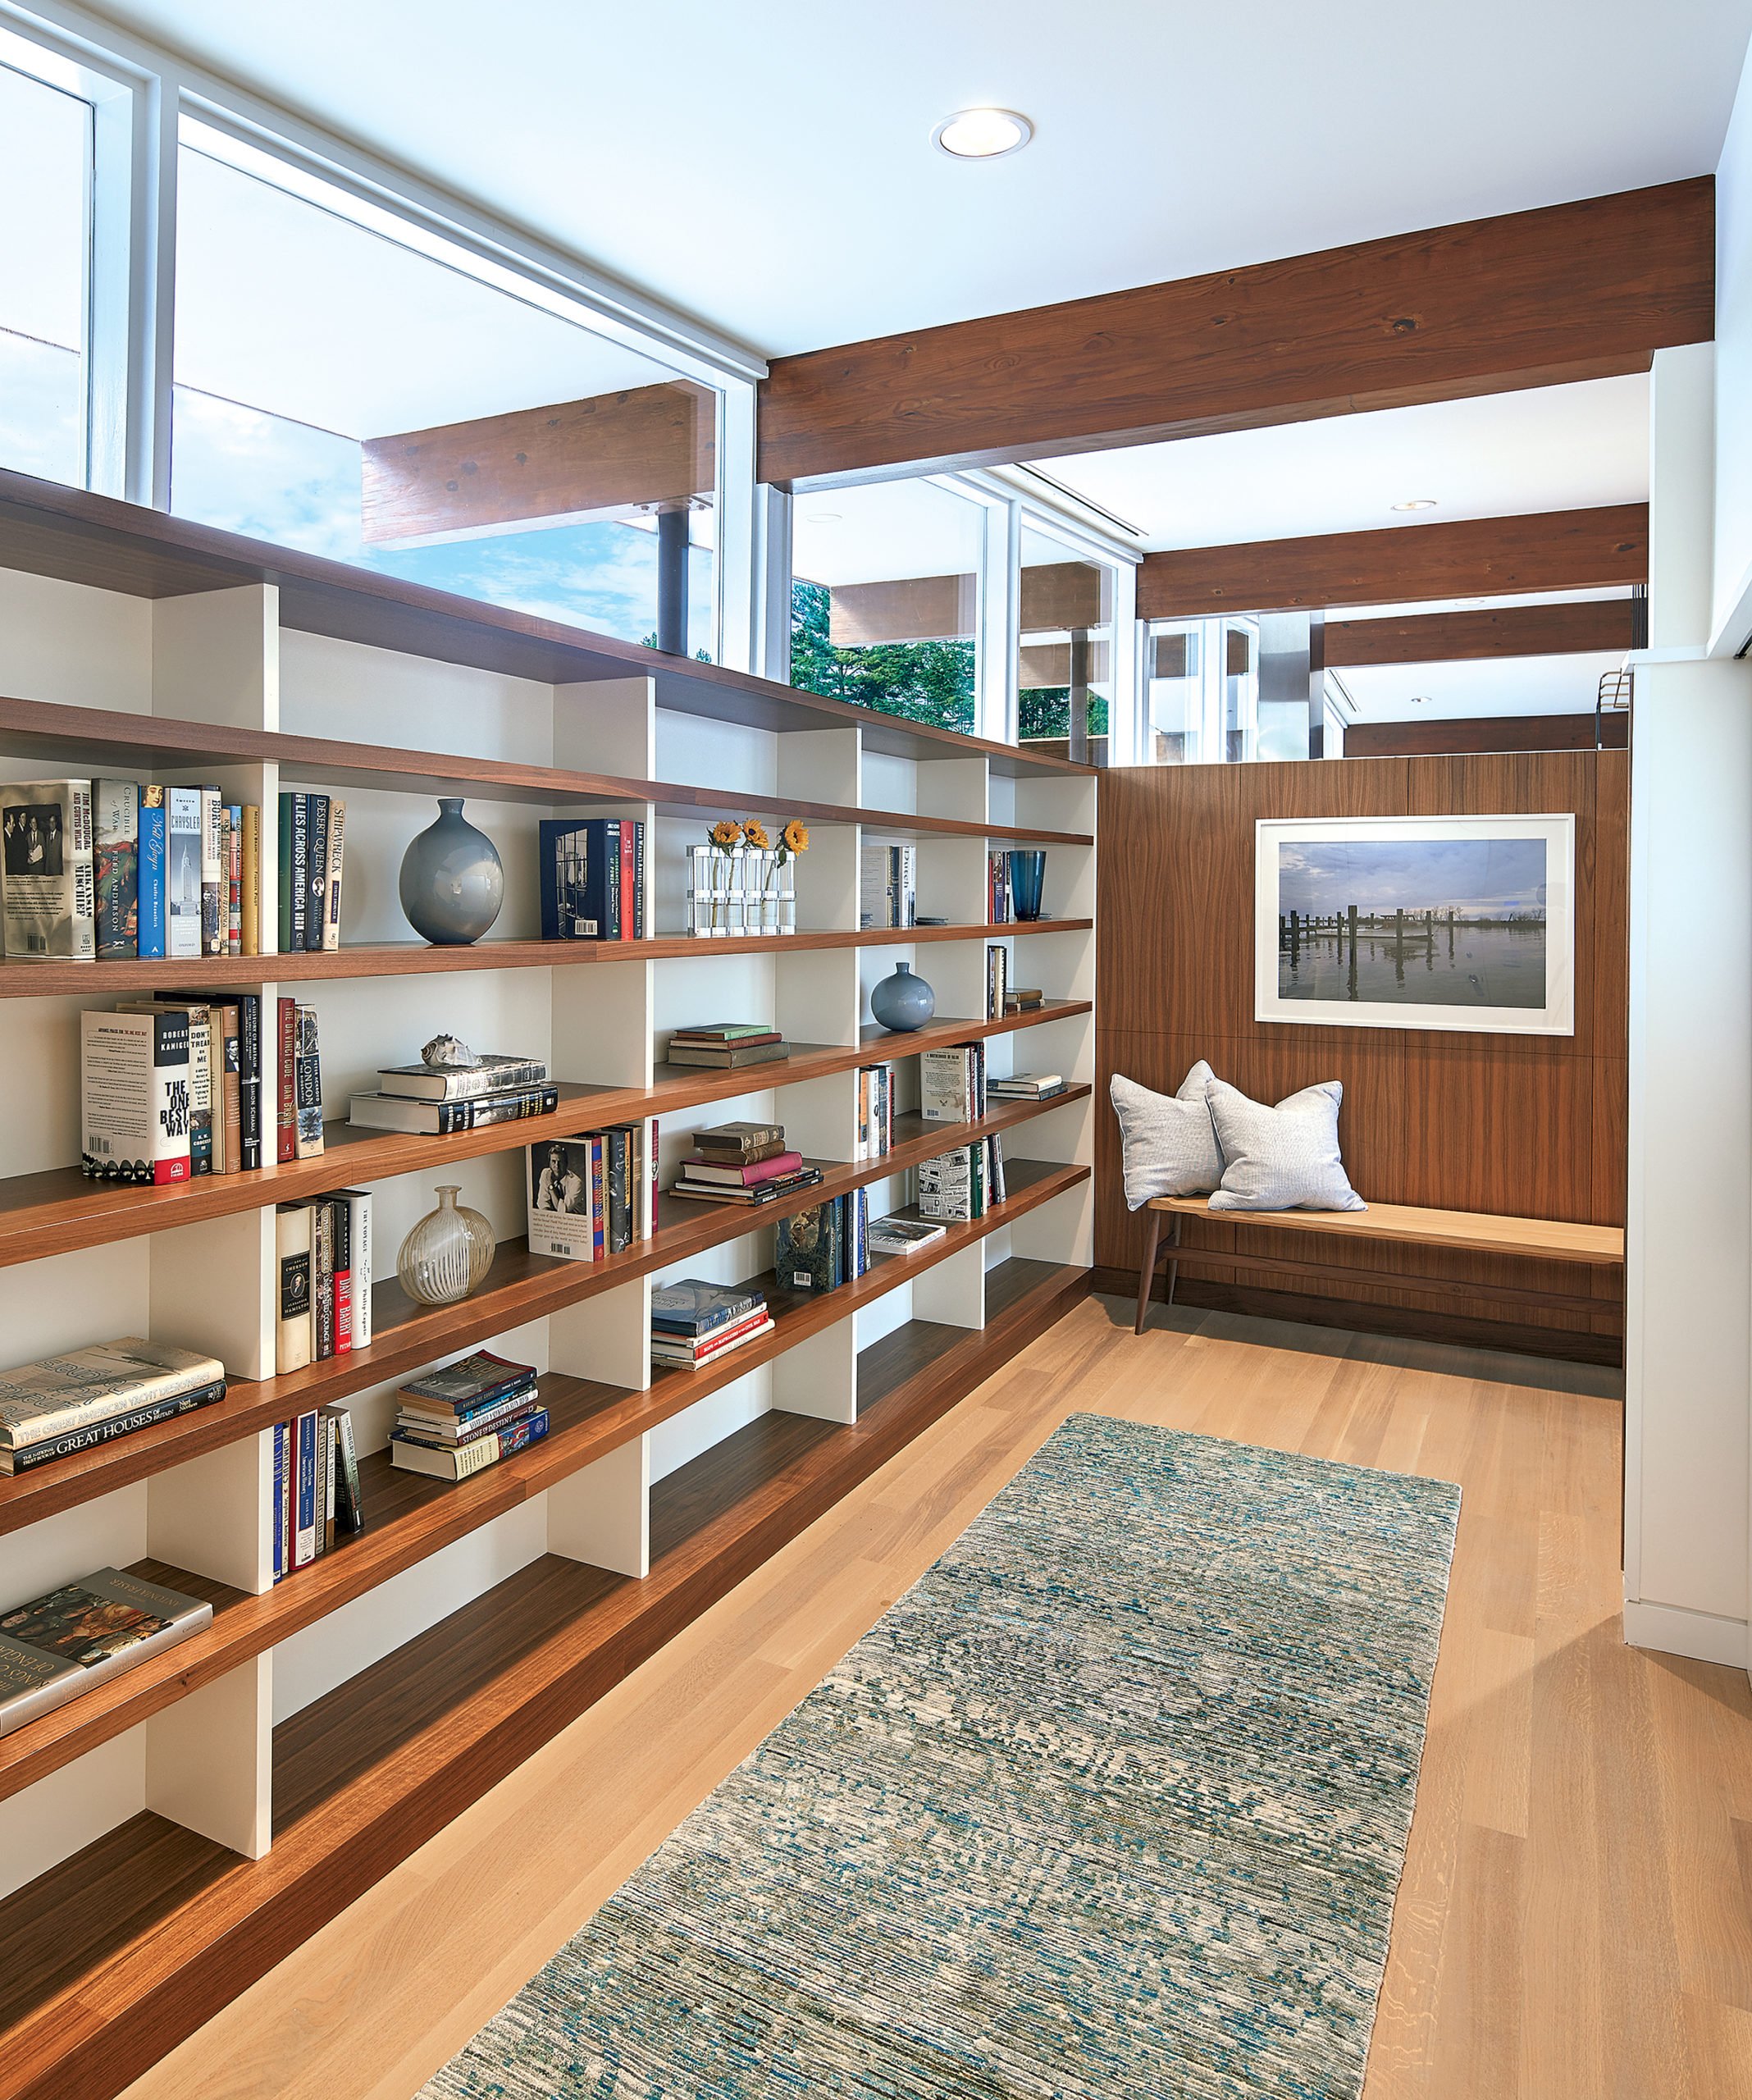 The architects added built-in shelves to the entryway, further emphasizing the clerestory windows above them.